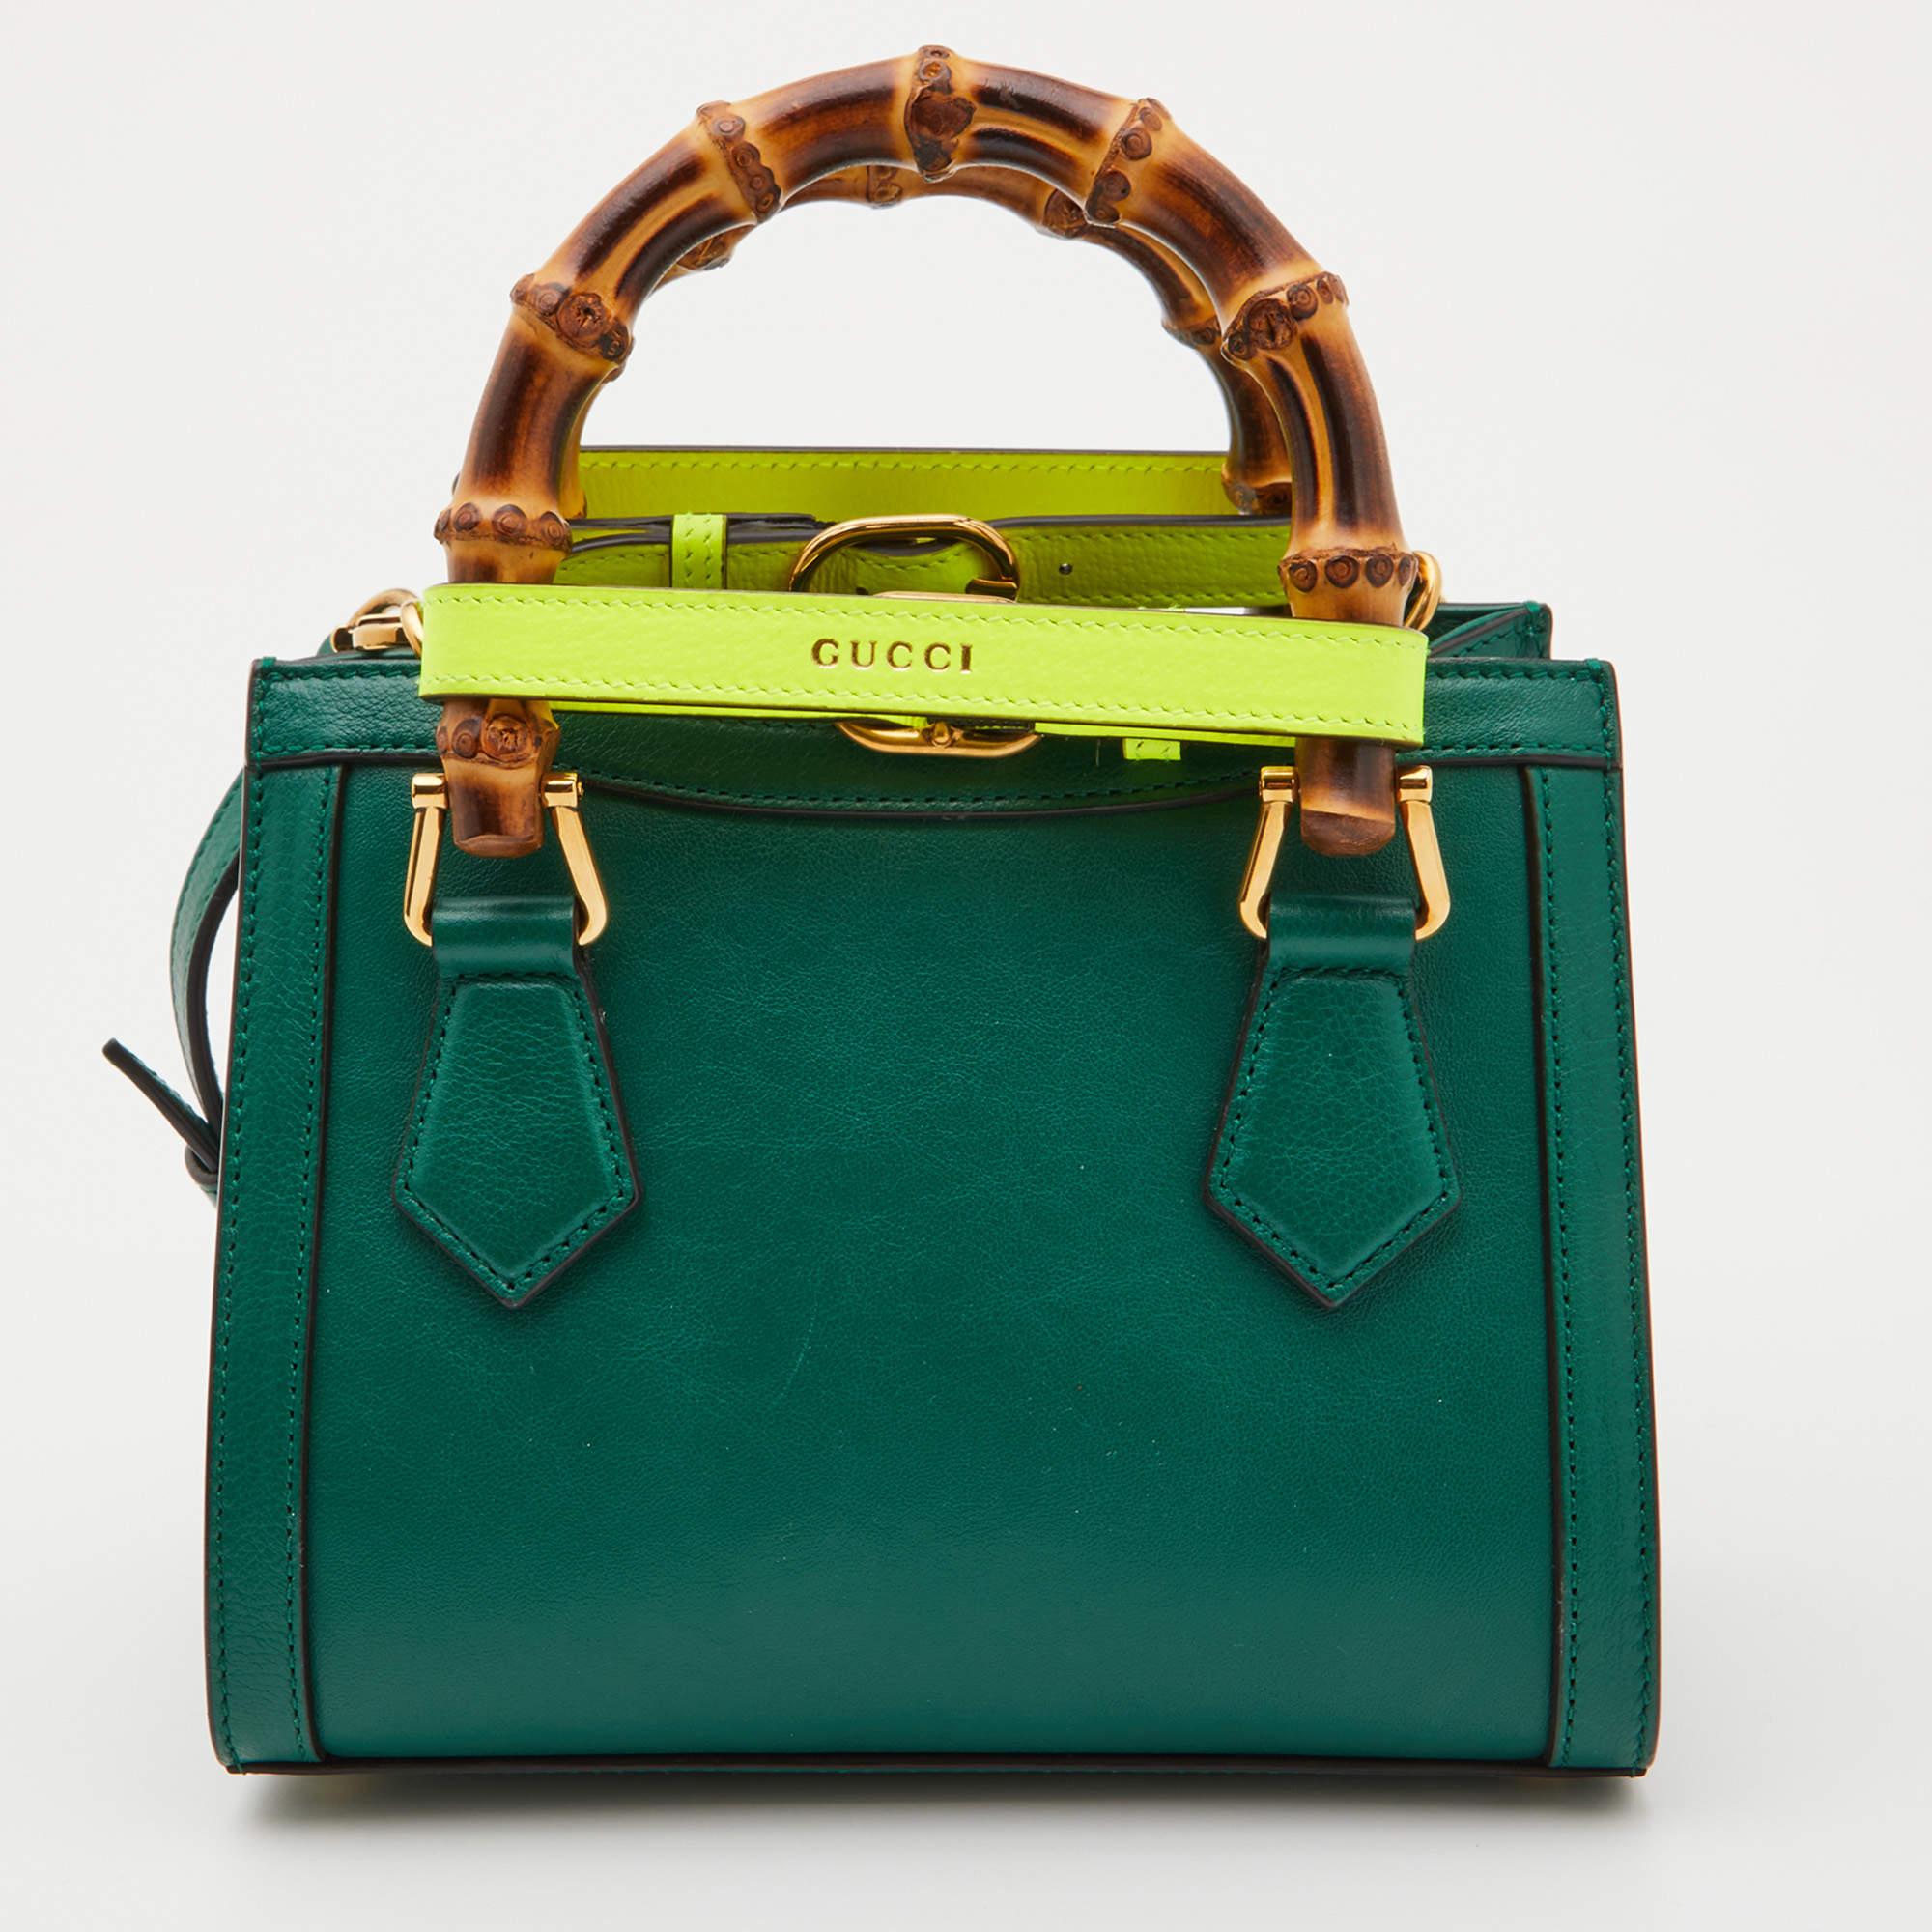 You are going to love owning this Mini Diana tote from Gucci as it is well-made and brimming with luxury. The Diana tote has been crafted from leather and lined with Alcantara on the insides. It has a green hue and two bamboo handles along with a